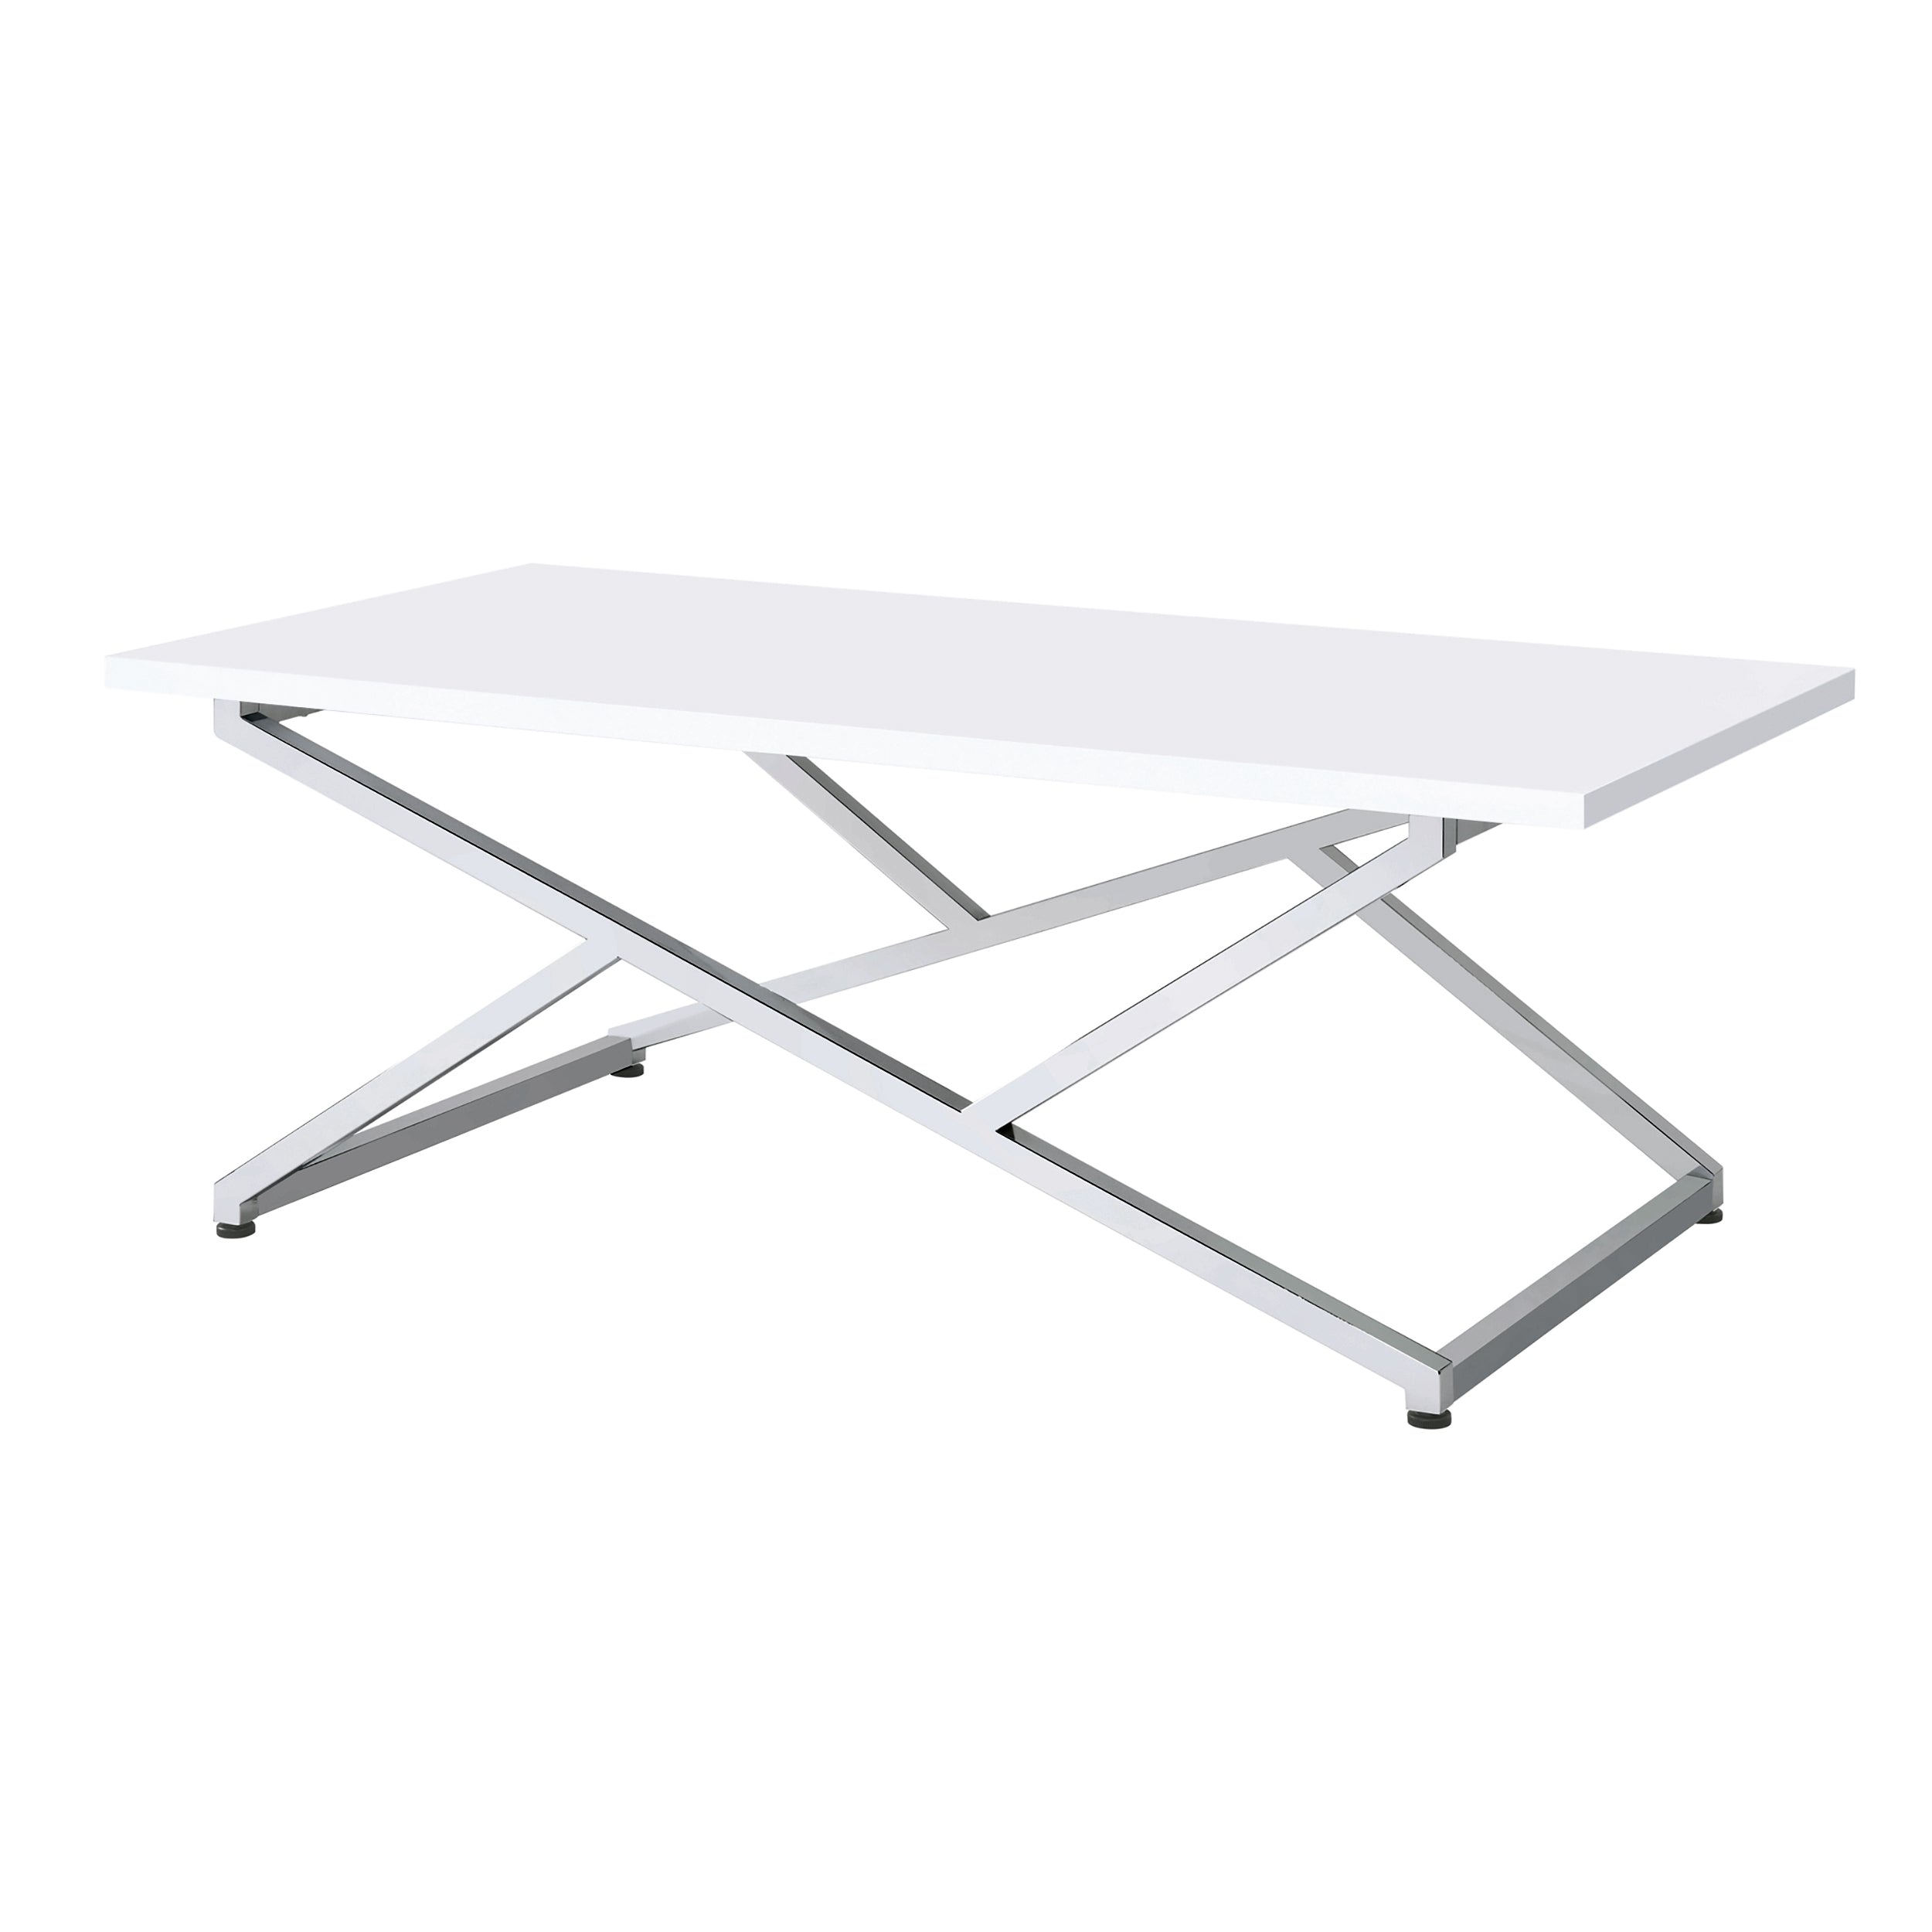 Lovelace Glam High Gloss White 2-Piece Coffee Table Set